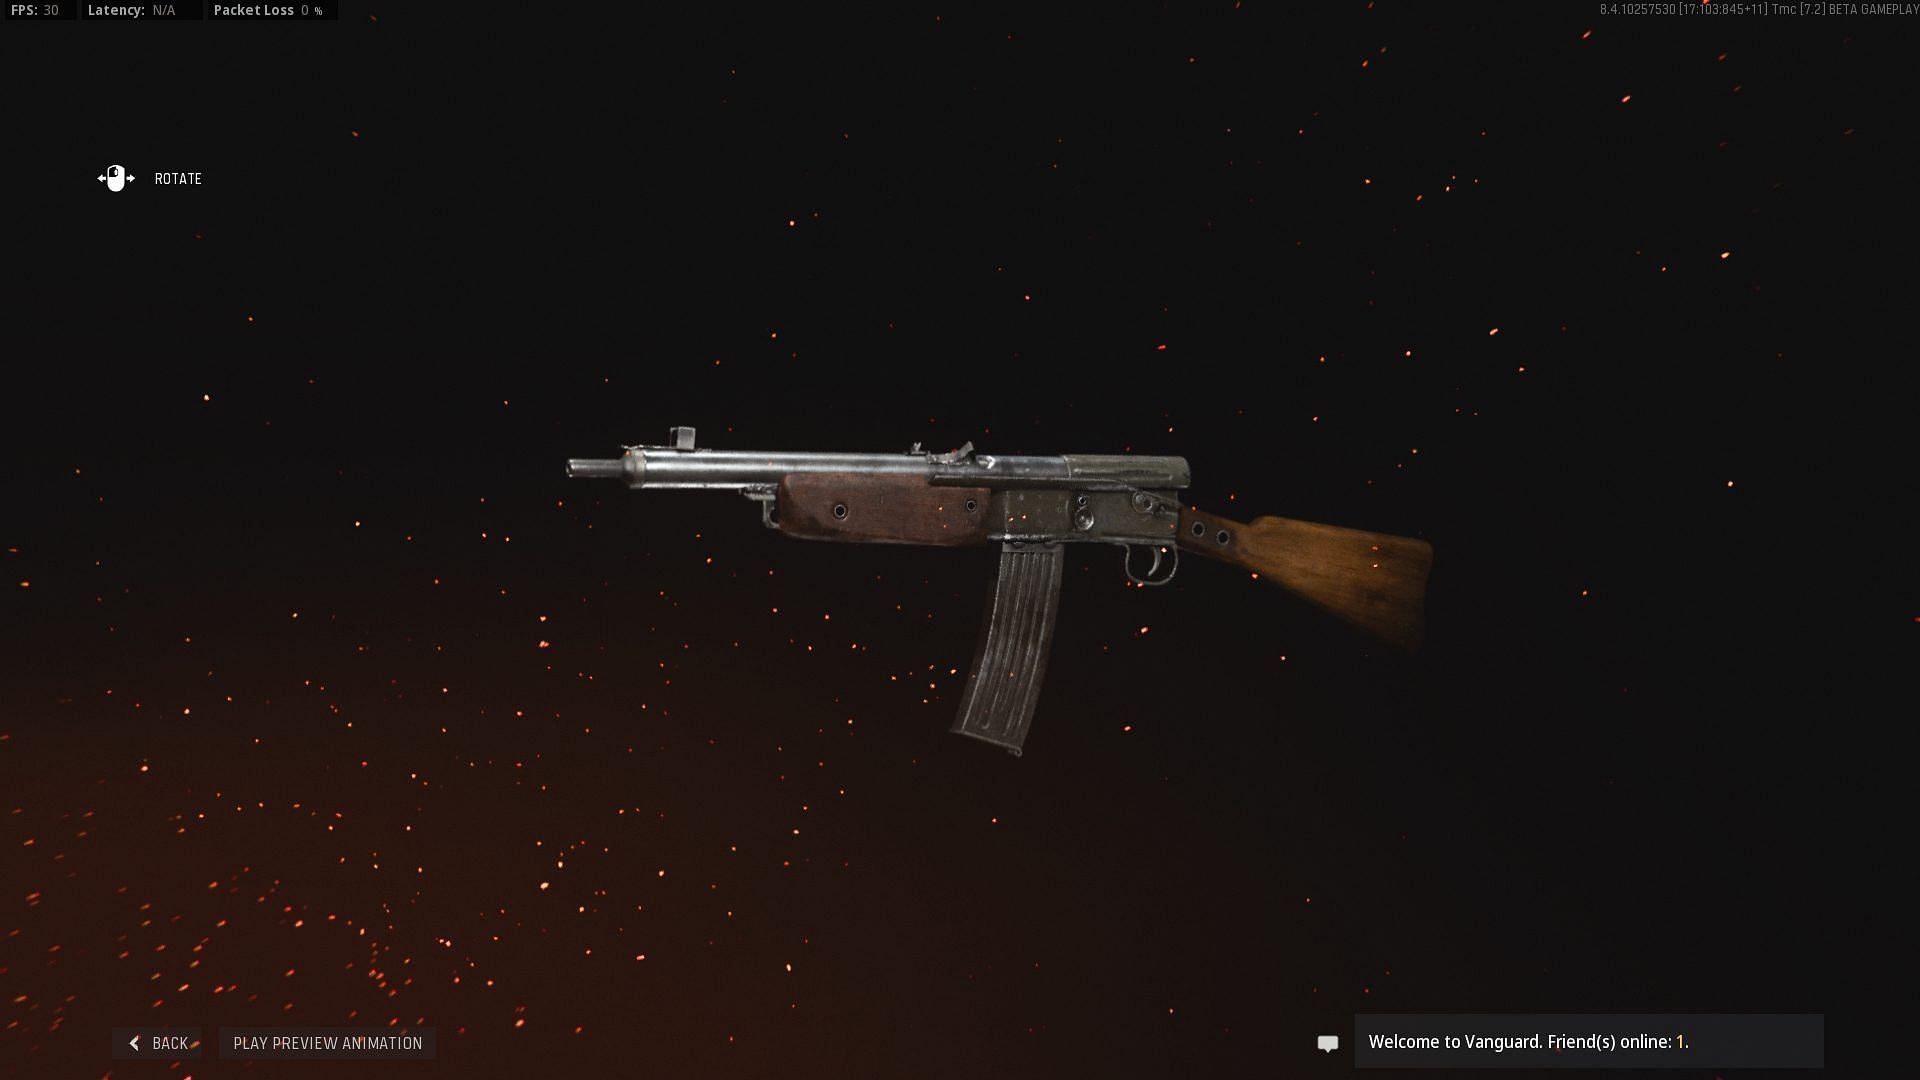 The Volk makes up for large recoil will good damage output (Image via Acticision)